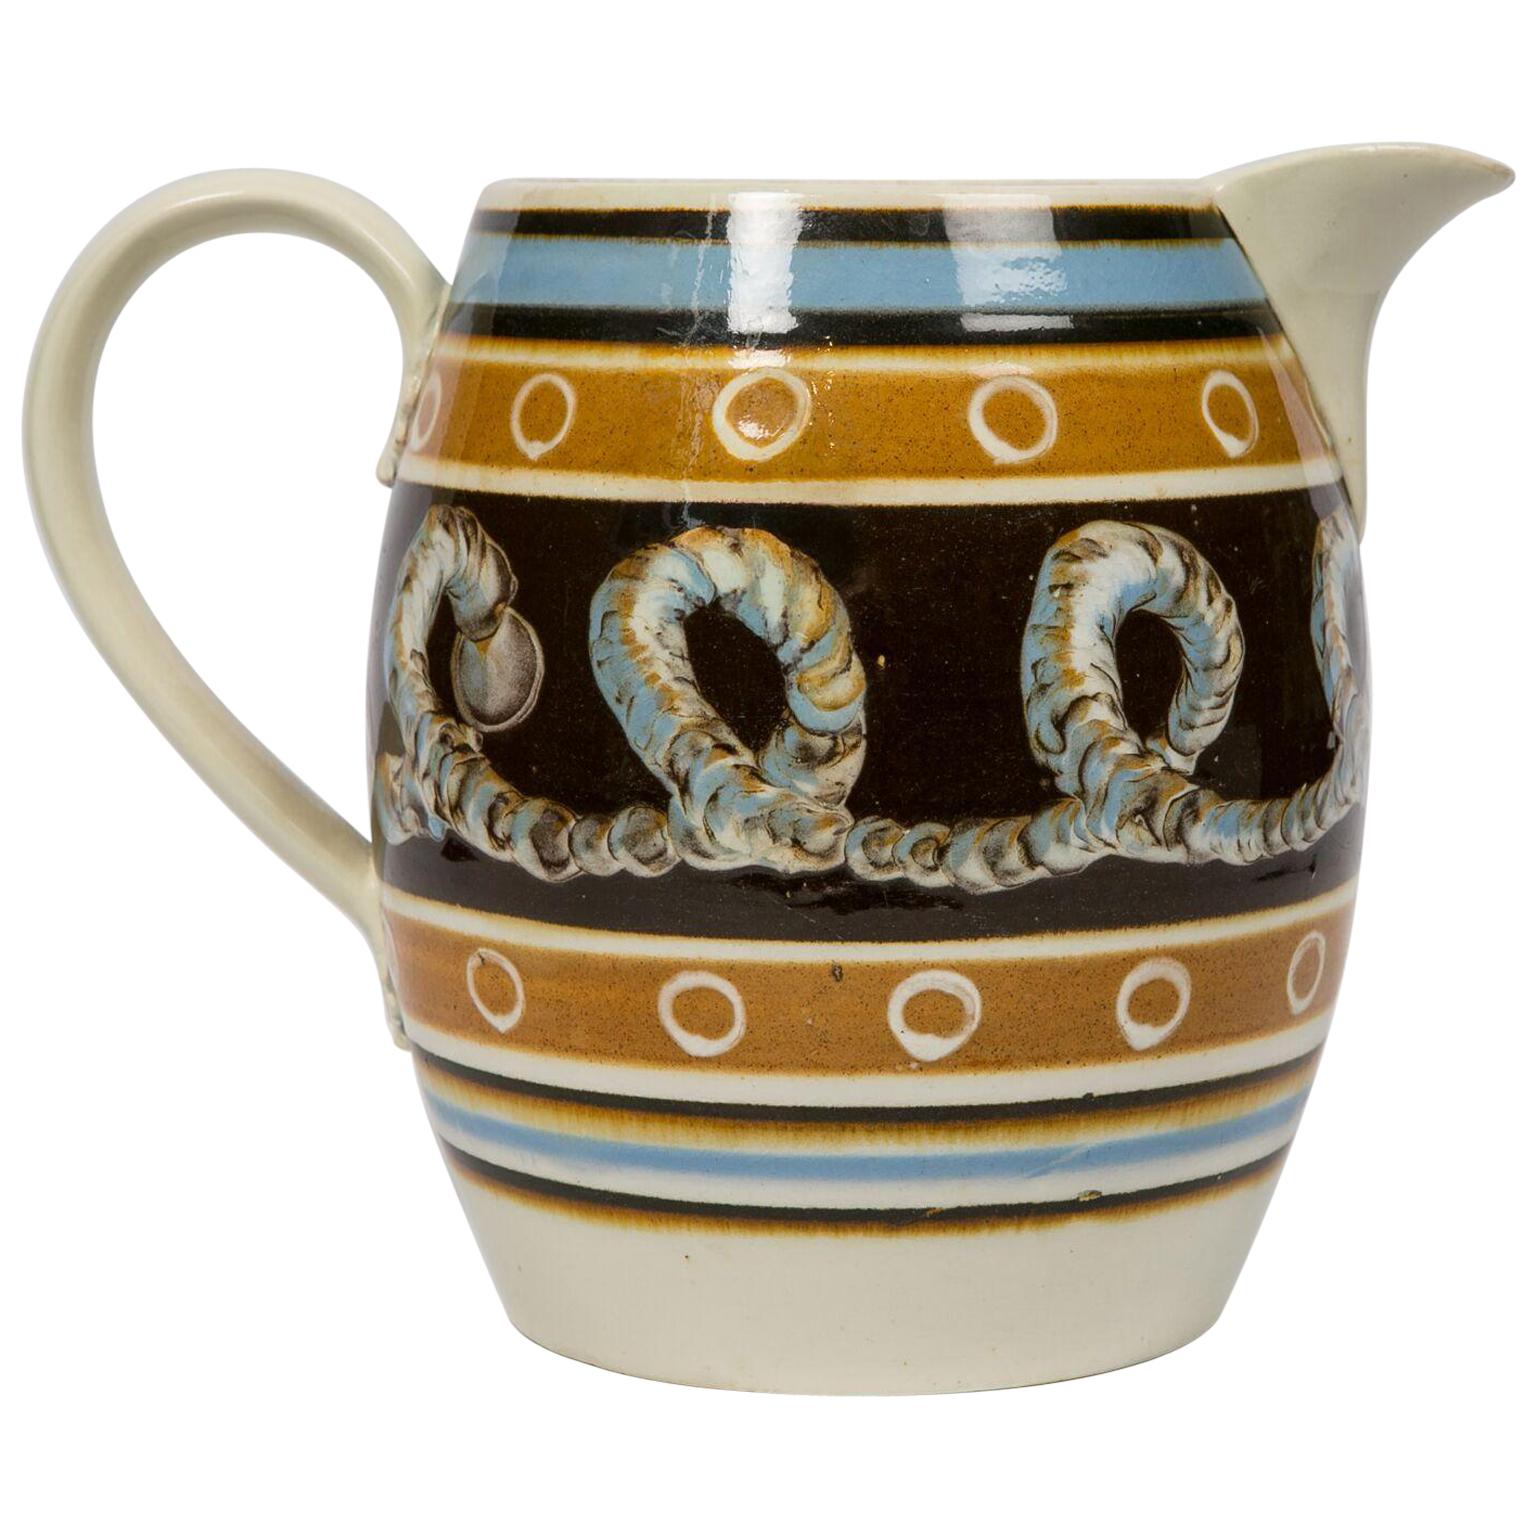 Extra Large Mochaware Pitcher with Cable Decoration England, circa 1820